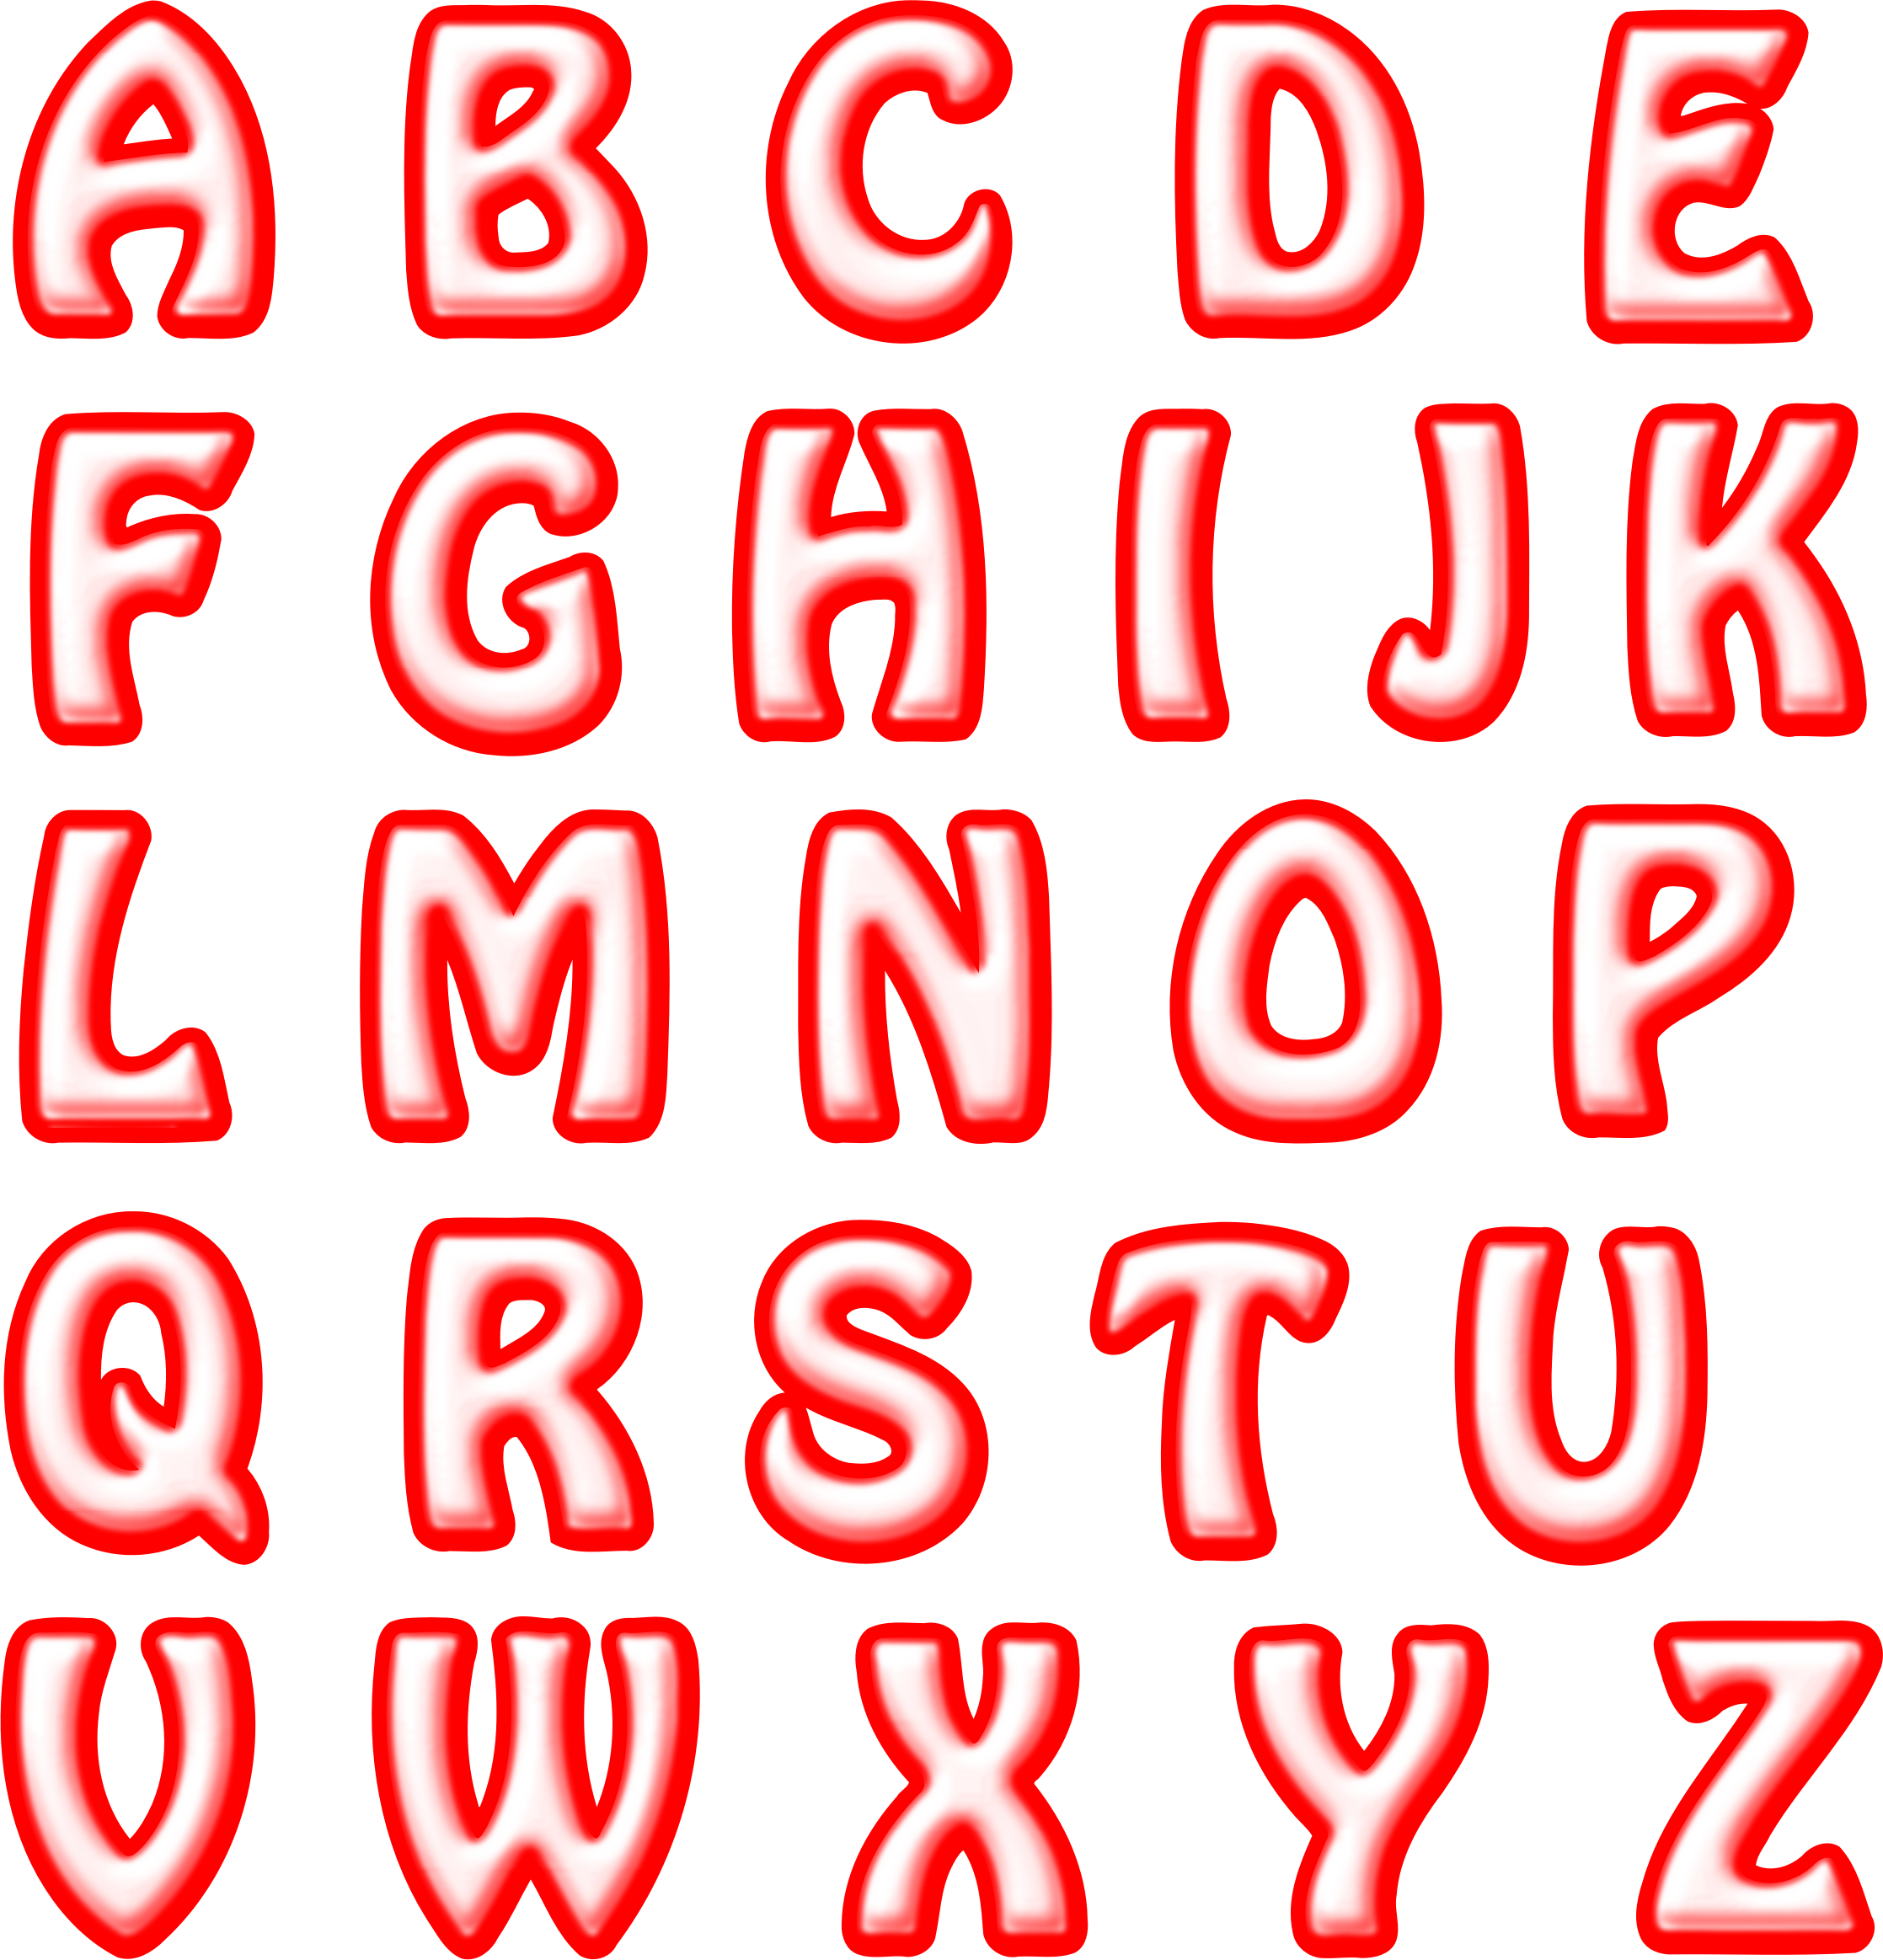 Red Alphabet Letters Vector Clipart Image Free Stock Photo Public